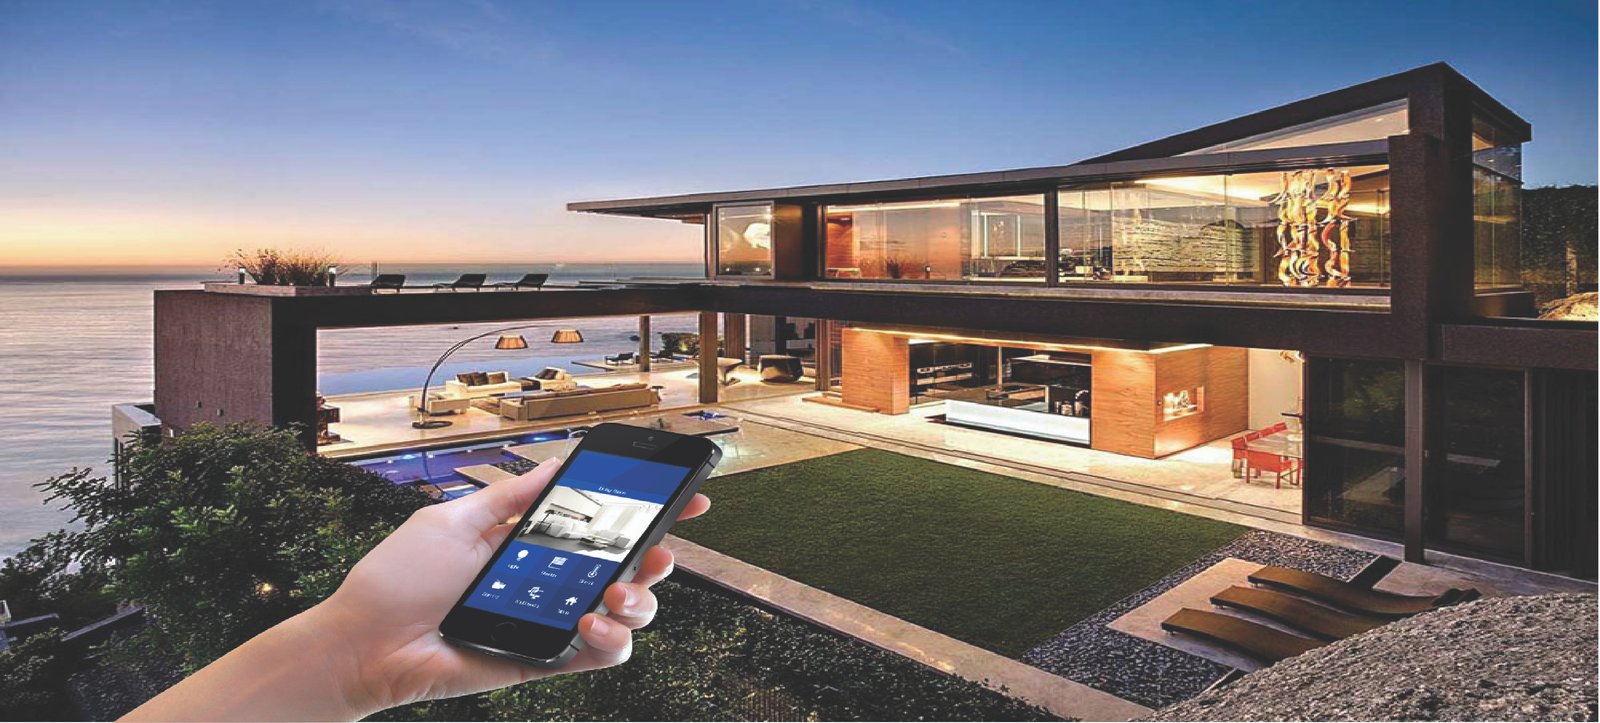 SMART HOME SOLUTIONS